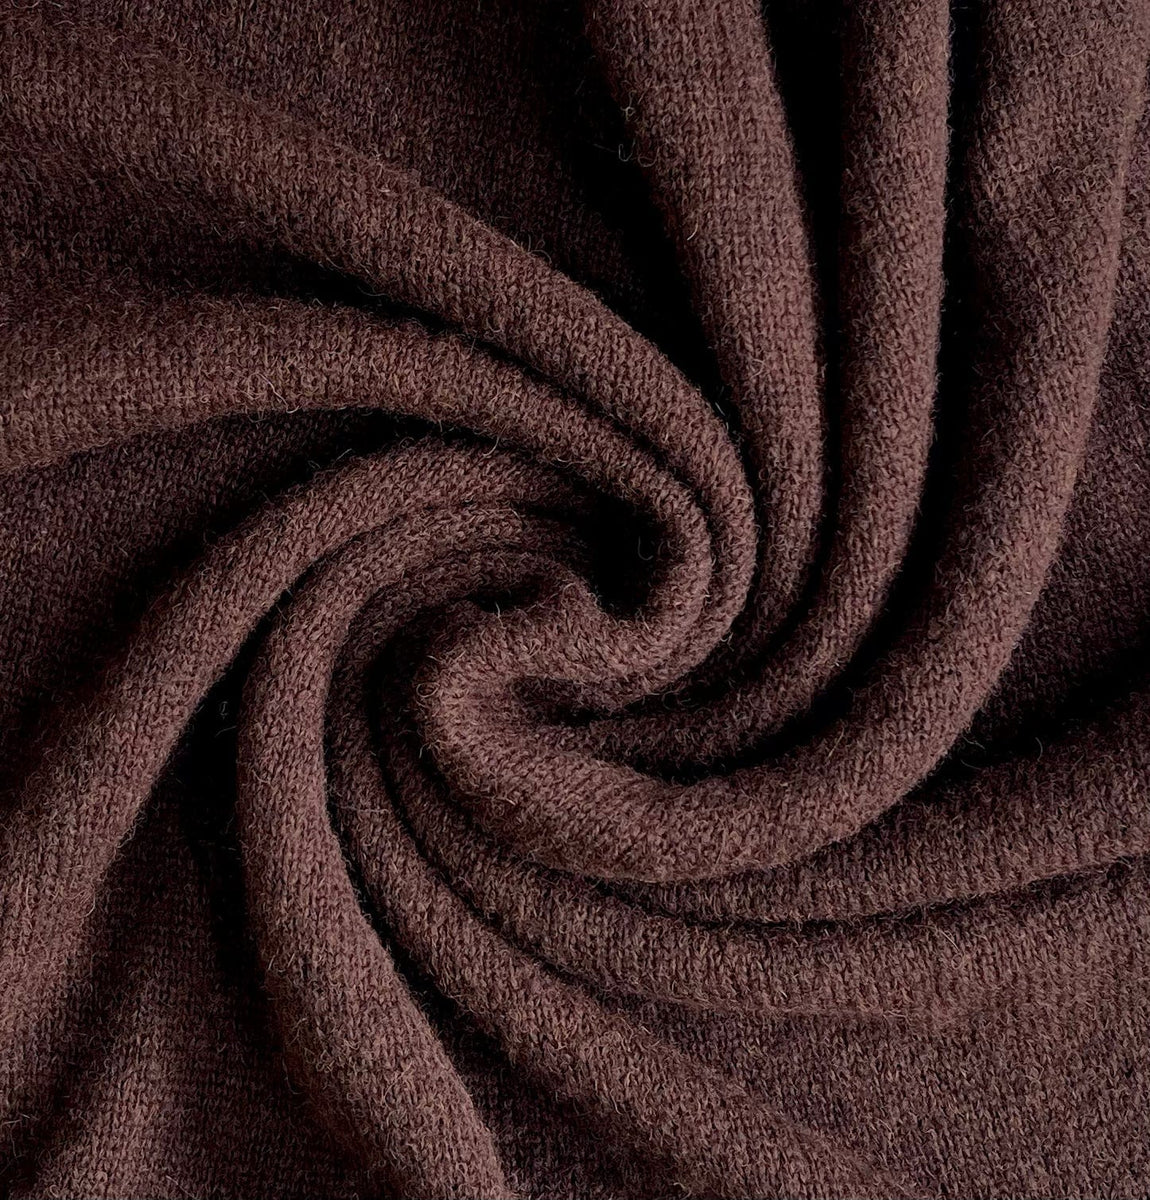 A close up image of an Ennis Dress - Mustang Brown.